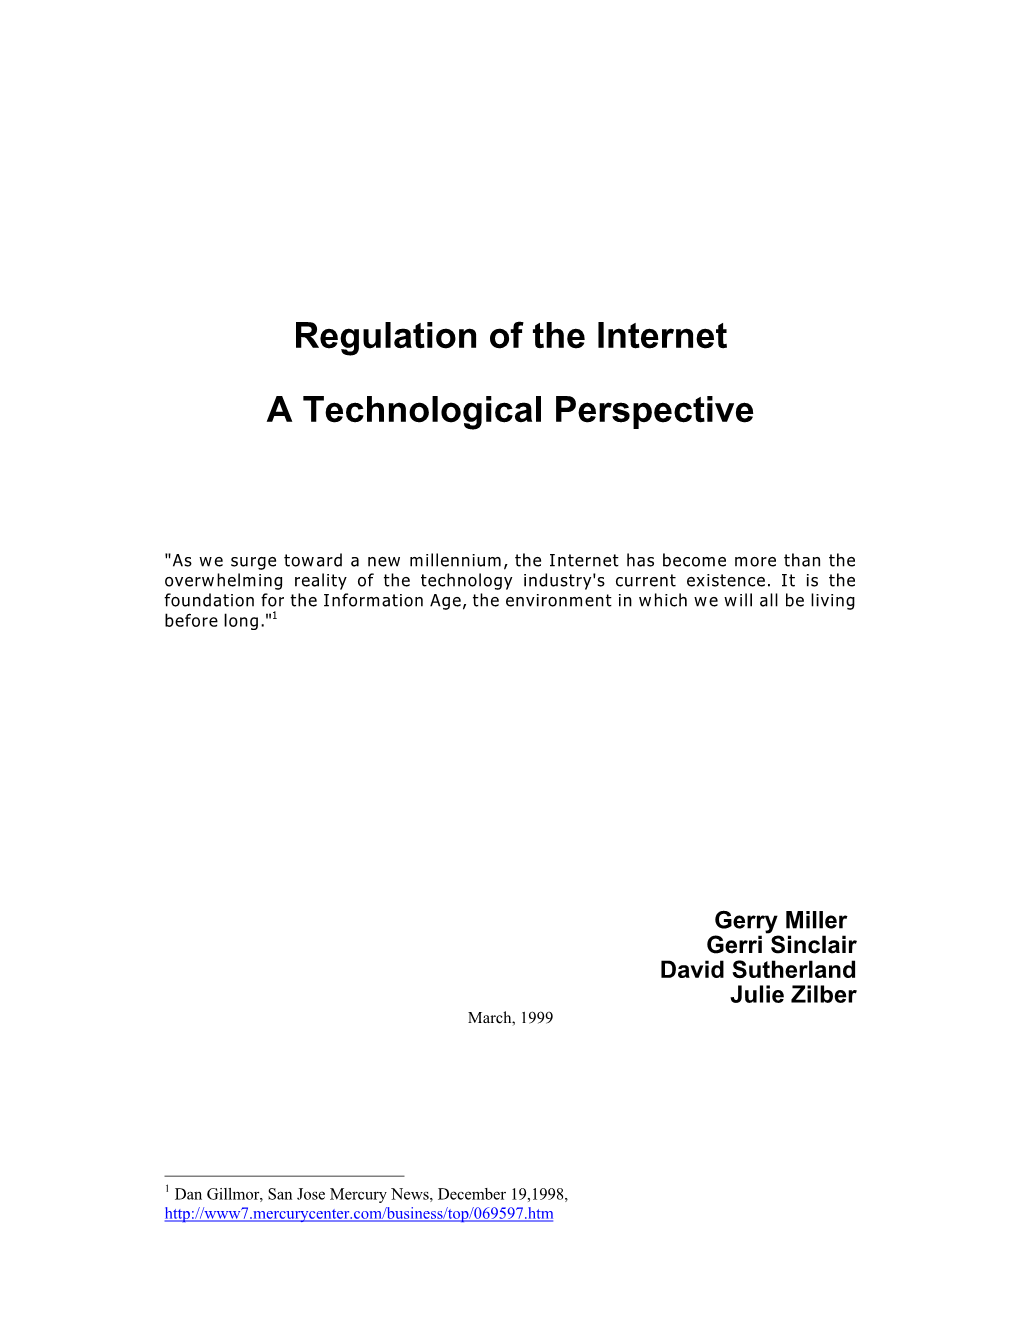 Regulation of the Internet a Technological Perspective